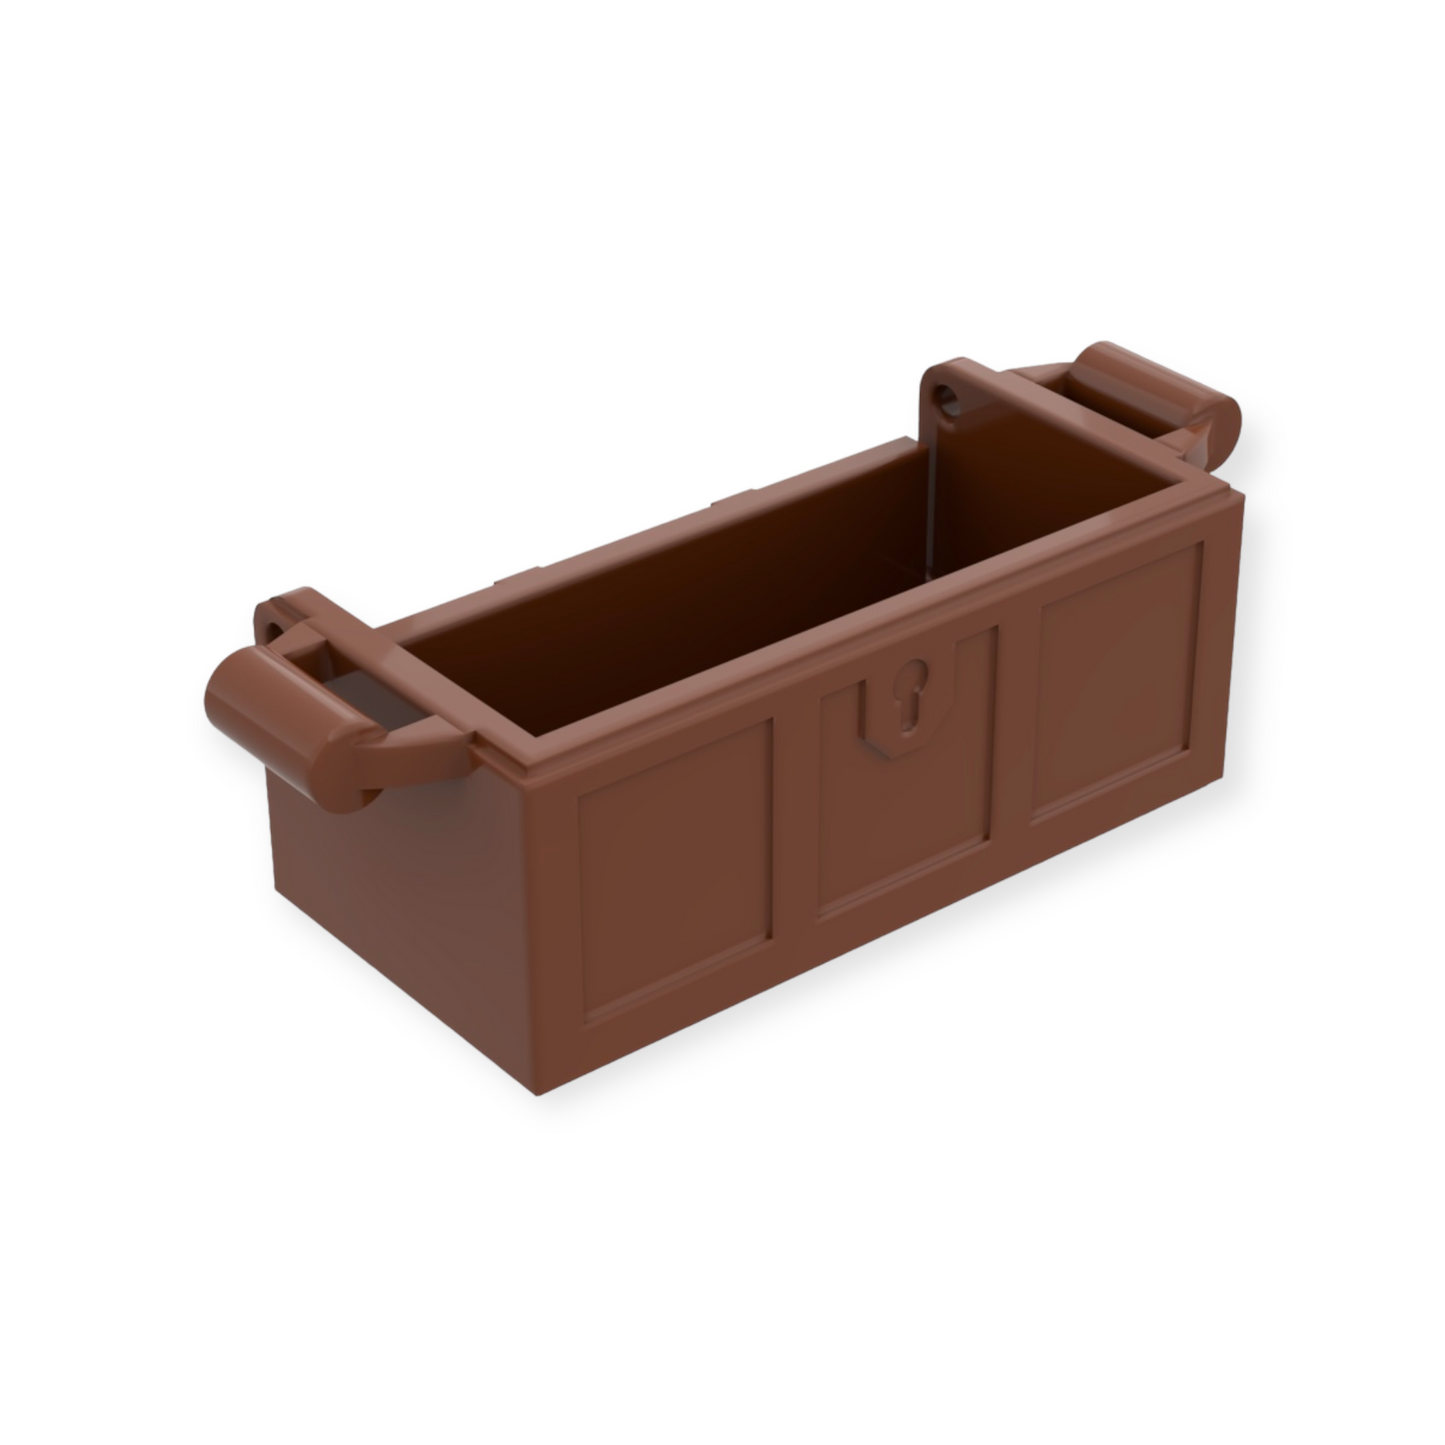 LEGO Container Treasure Chest Bottom with Slots in Back - Reddish Brown